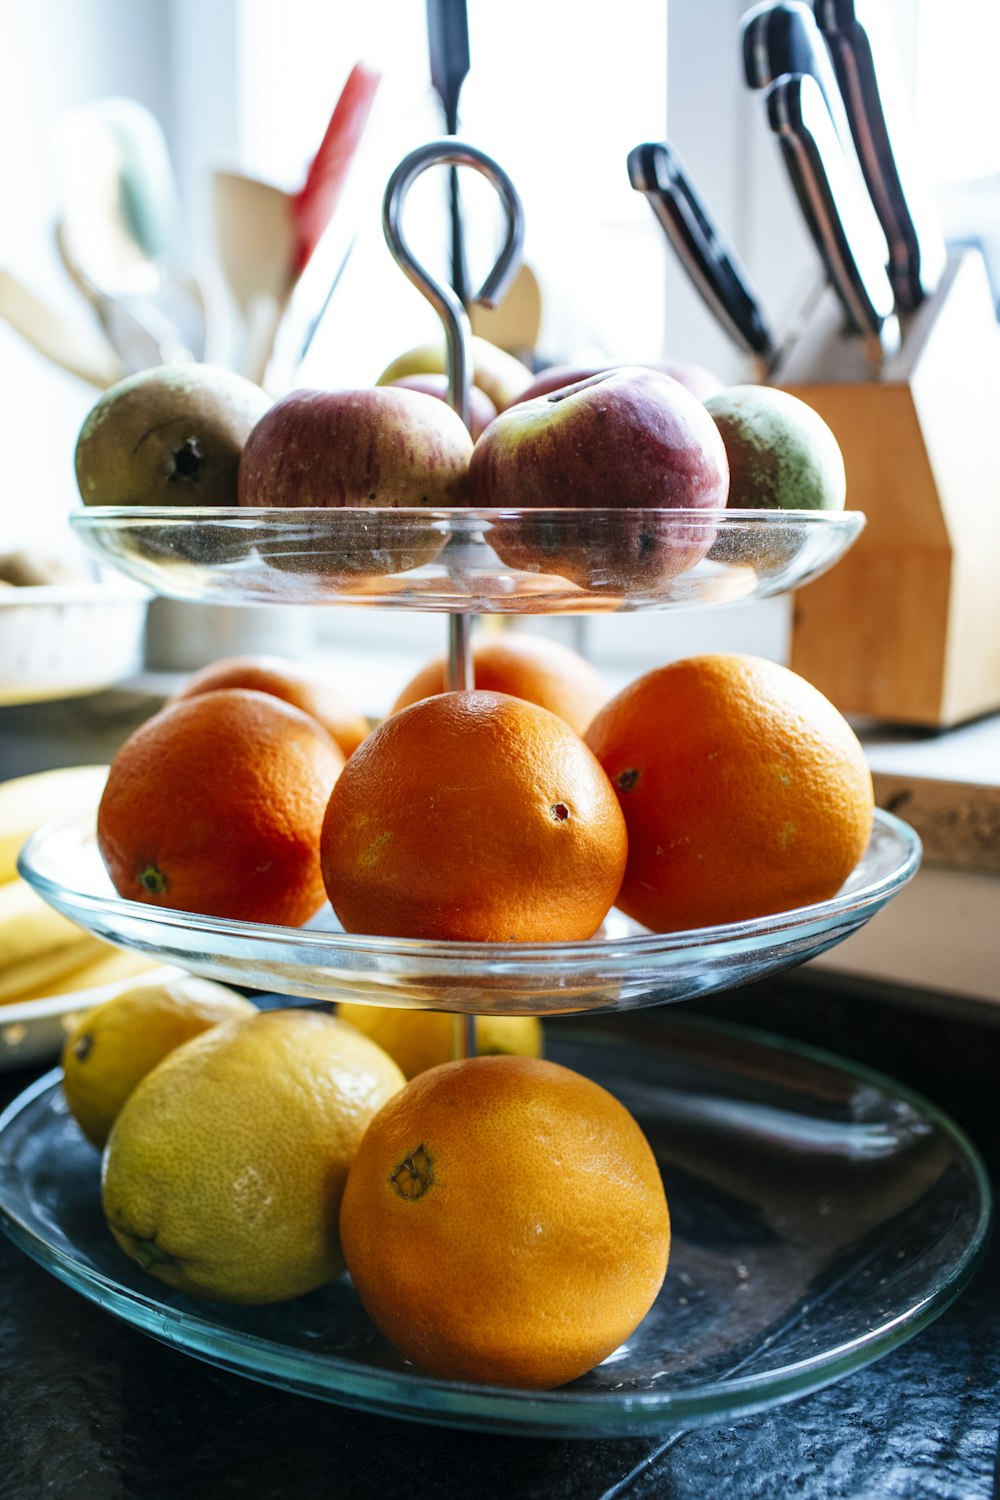 a three tiered glass plate filled with oranges and lemons